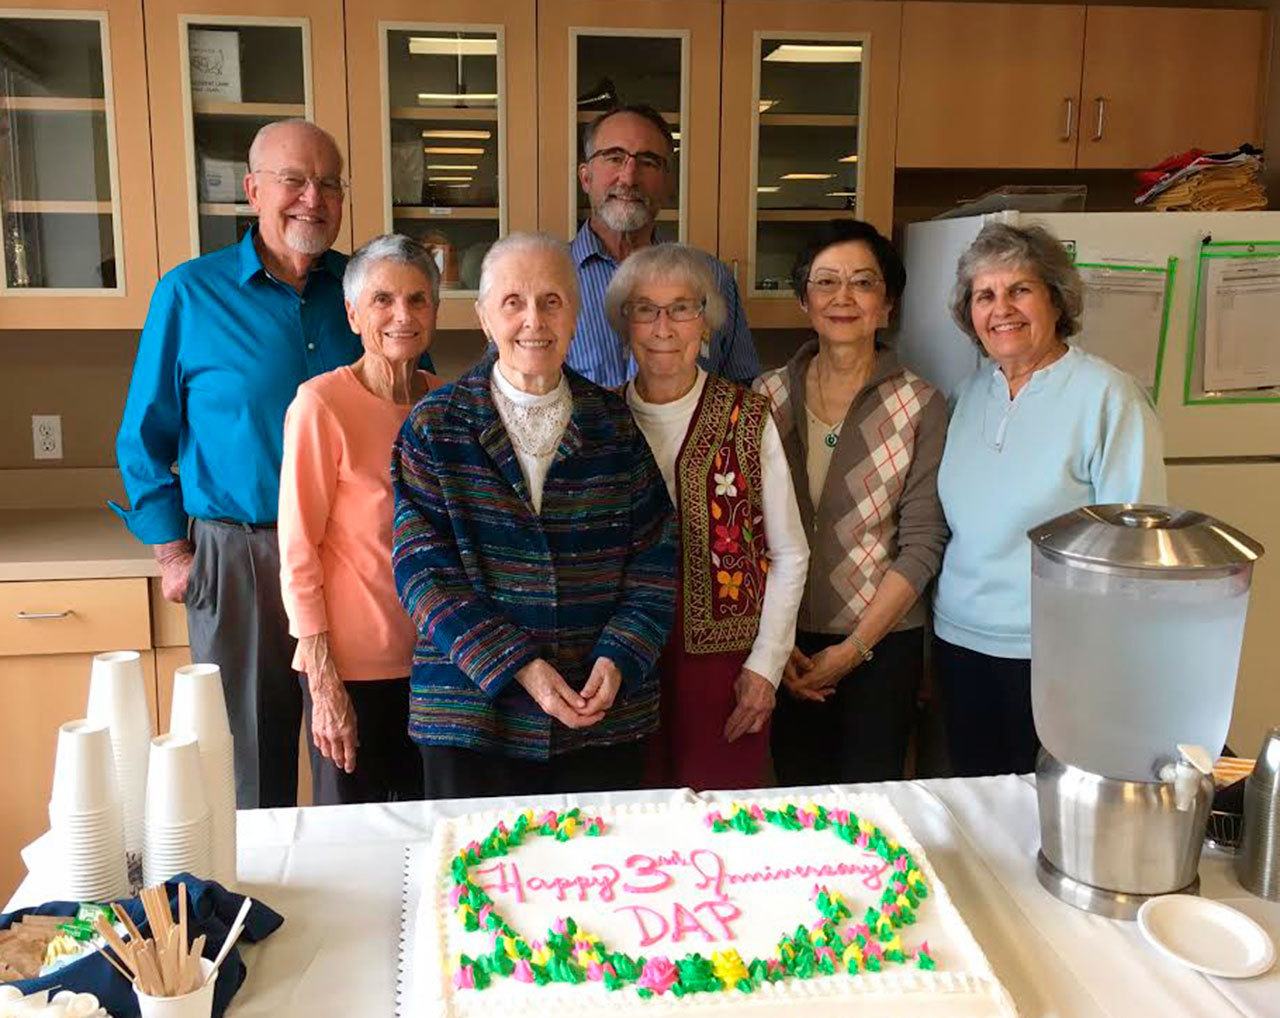 From left, Diversity Awareness Partners Mark Jensen, Biji Keigley, Ruth Kverndal, Tom Nielsen (back), Joy Thomson, Lorinda Tang and Joan Selvig pose during the celebration of the third anniversary of their group. Photo courtesy of Covenant Shores